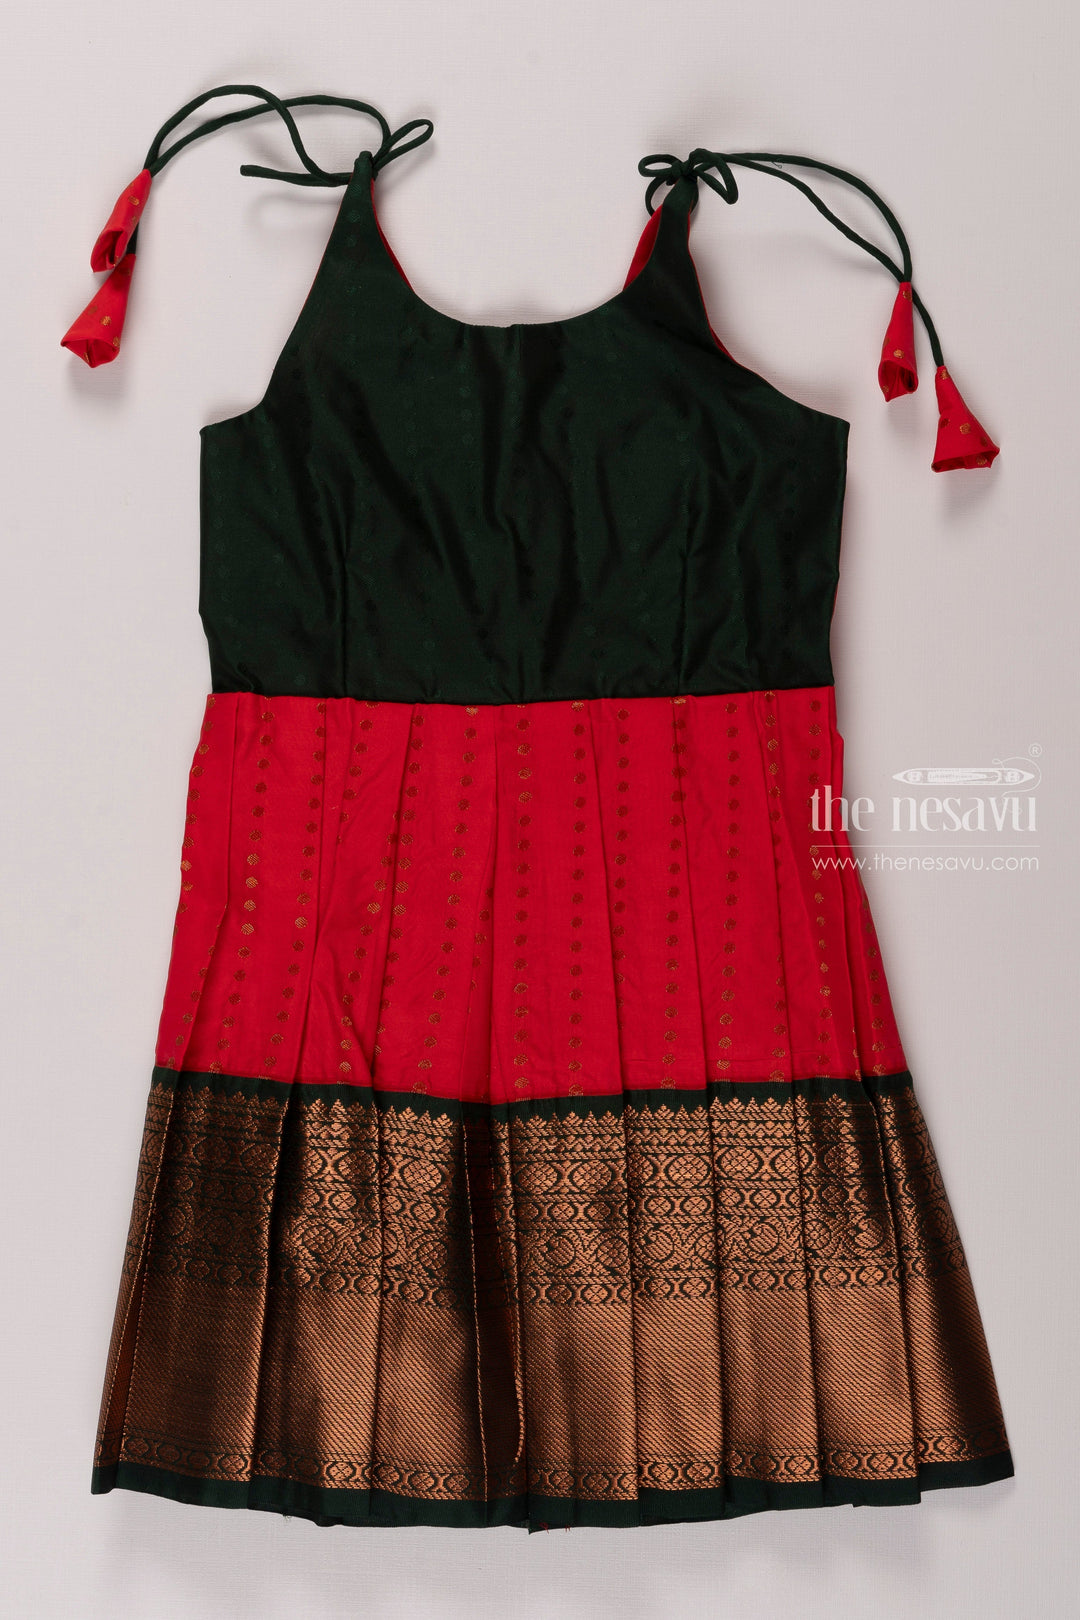 The Nesavu Tie-up Frock Elegant Red and Green Tie-up Silk Frock for Girls Nesavu 18 (2Y) / Red / Style 3 T358C-18 Girls Red and Green Banarasi Border Silk Frock | Traditional Festive Wear | The Nesavu